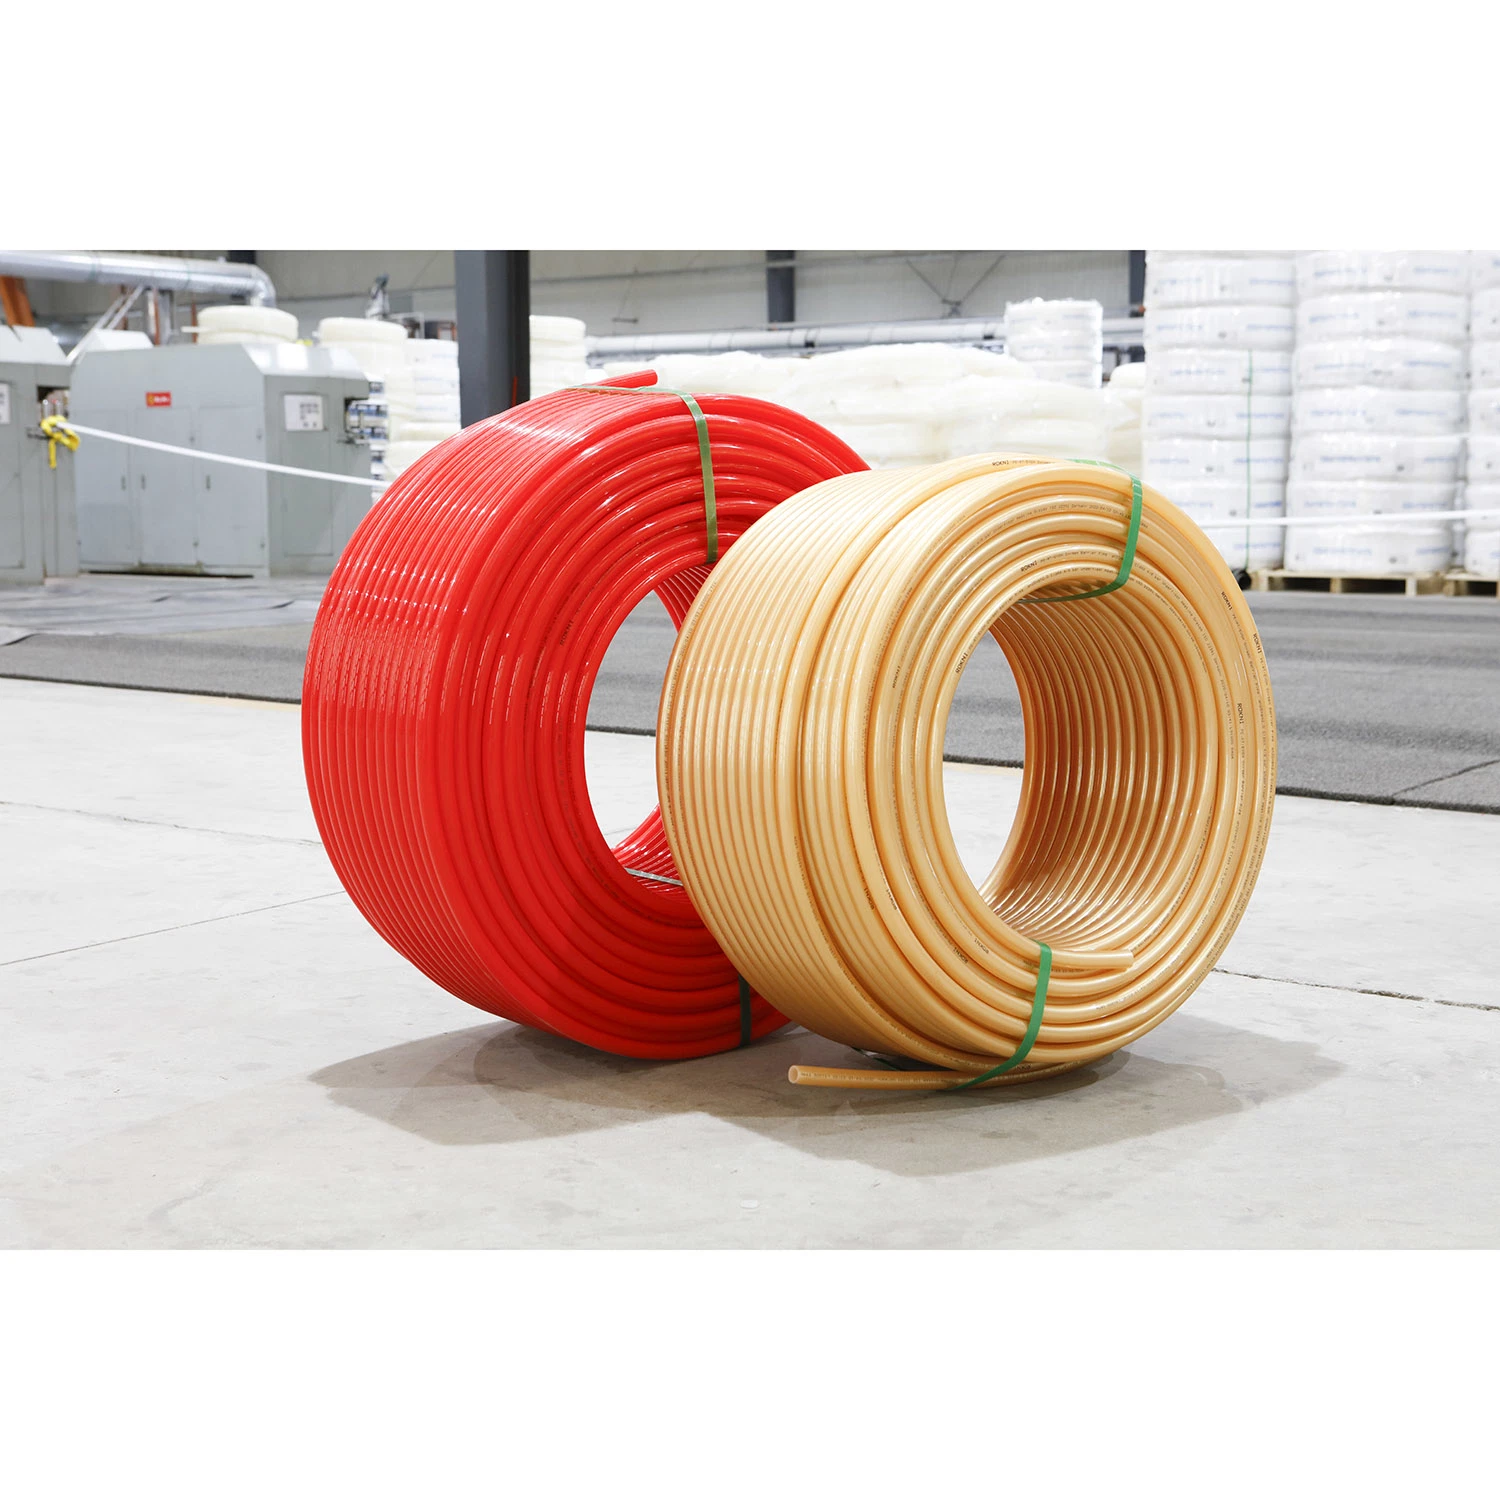 International Standard Pex-a Pipe/Pert Pipe/PPR with Oxygen Barrier for Underfloor Heating